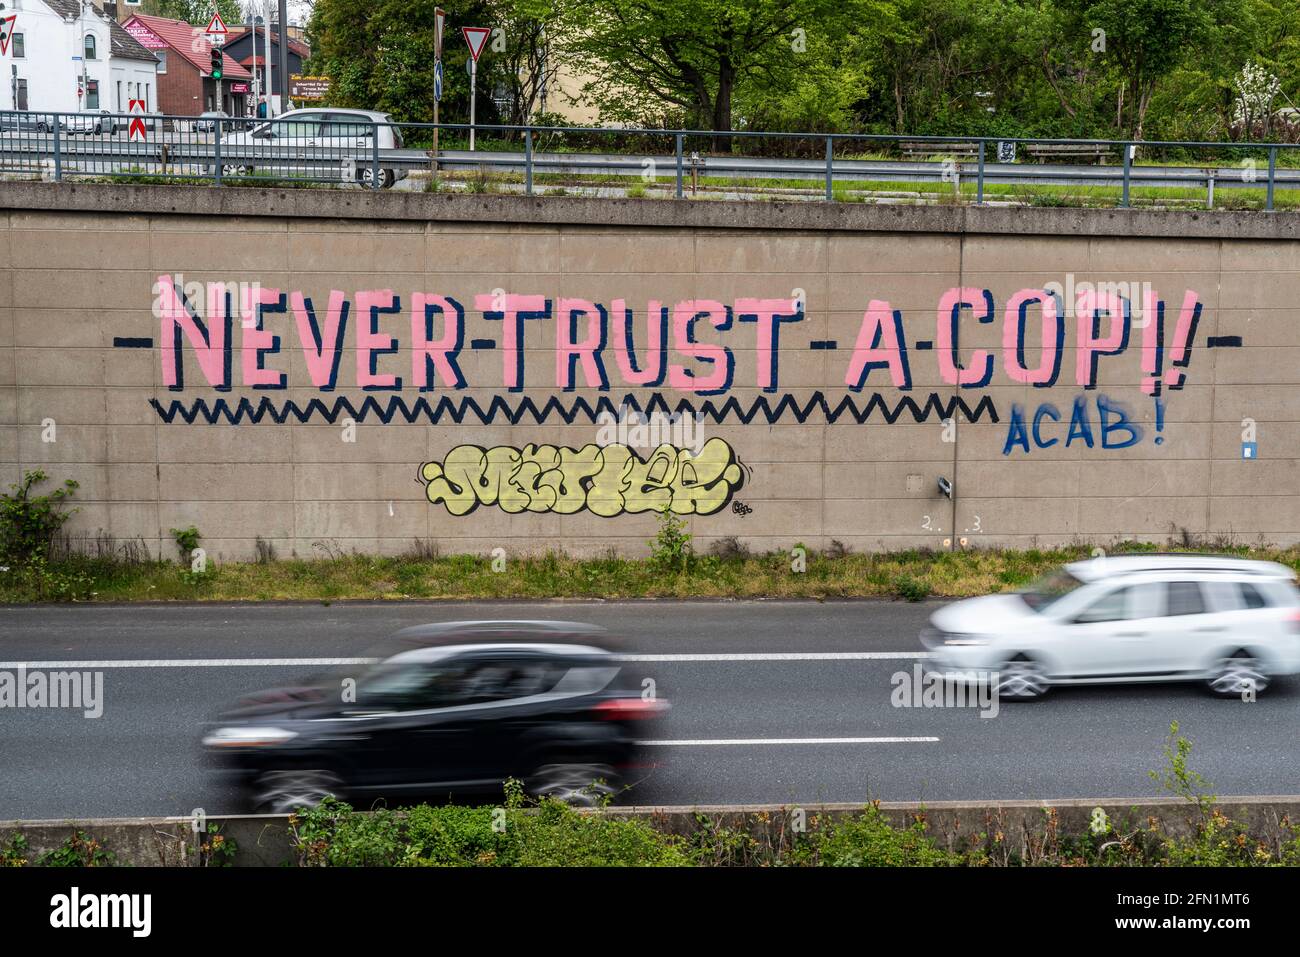 Graffiti, mural on the A40 motorway, Mülheim-Styrum junction, Never trust a cop, criticism of the police, verbal violence against police officers, Mül Stock Photo